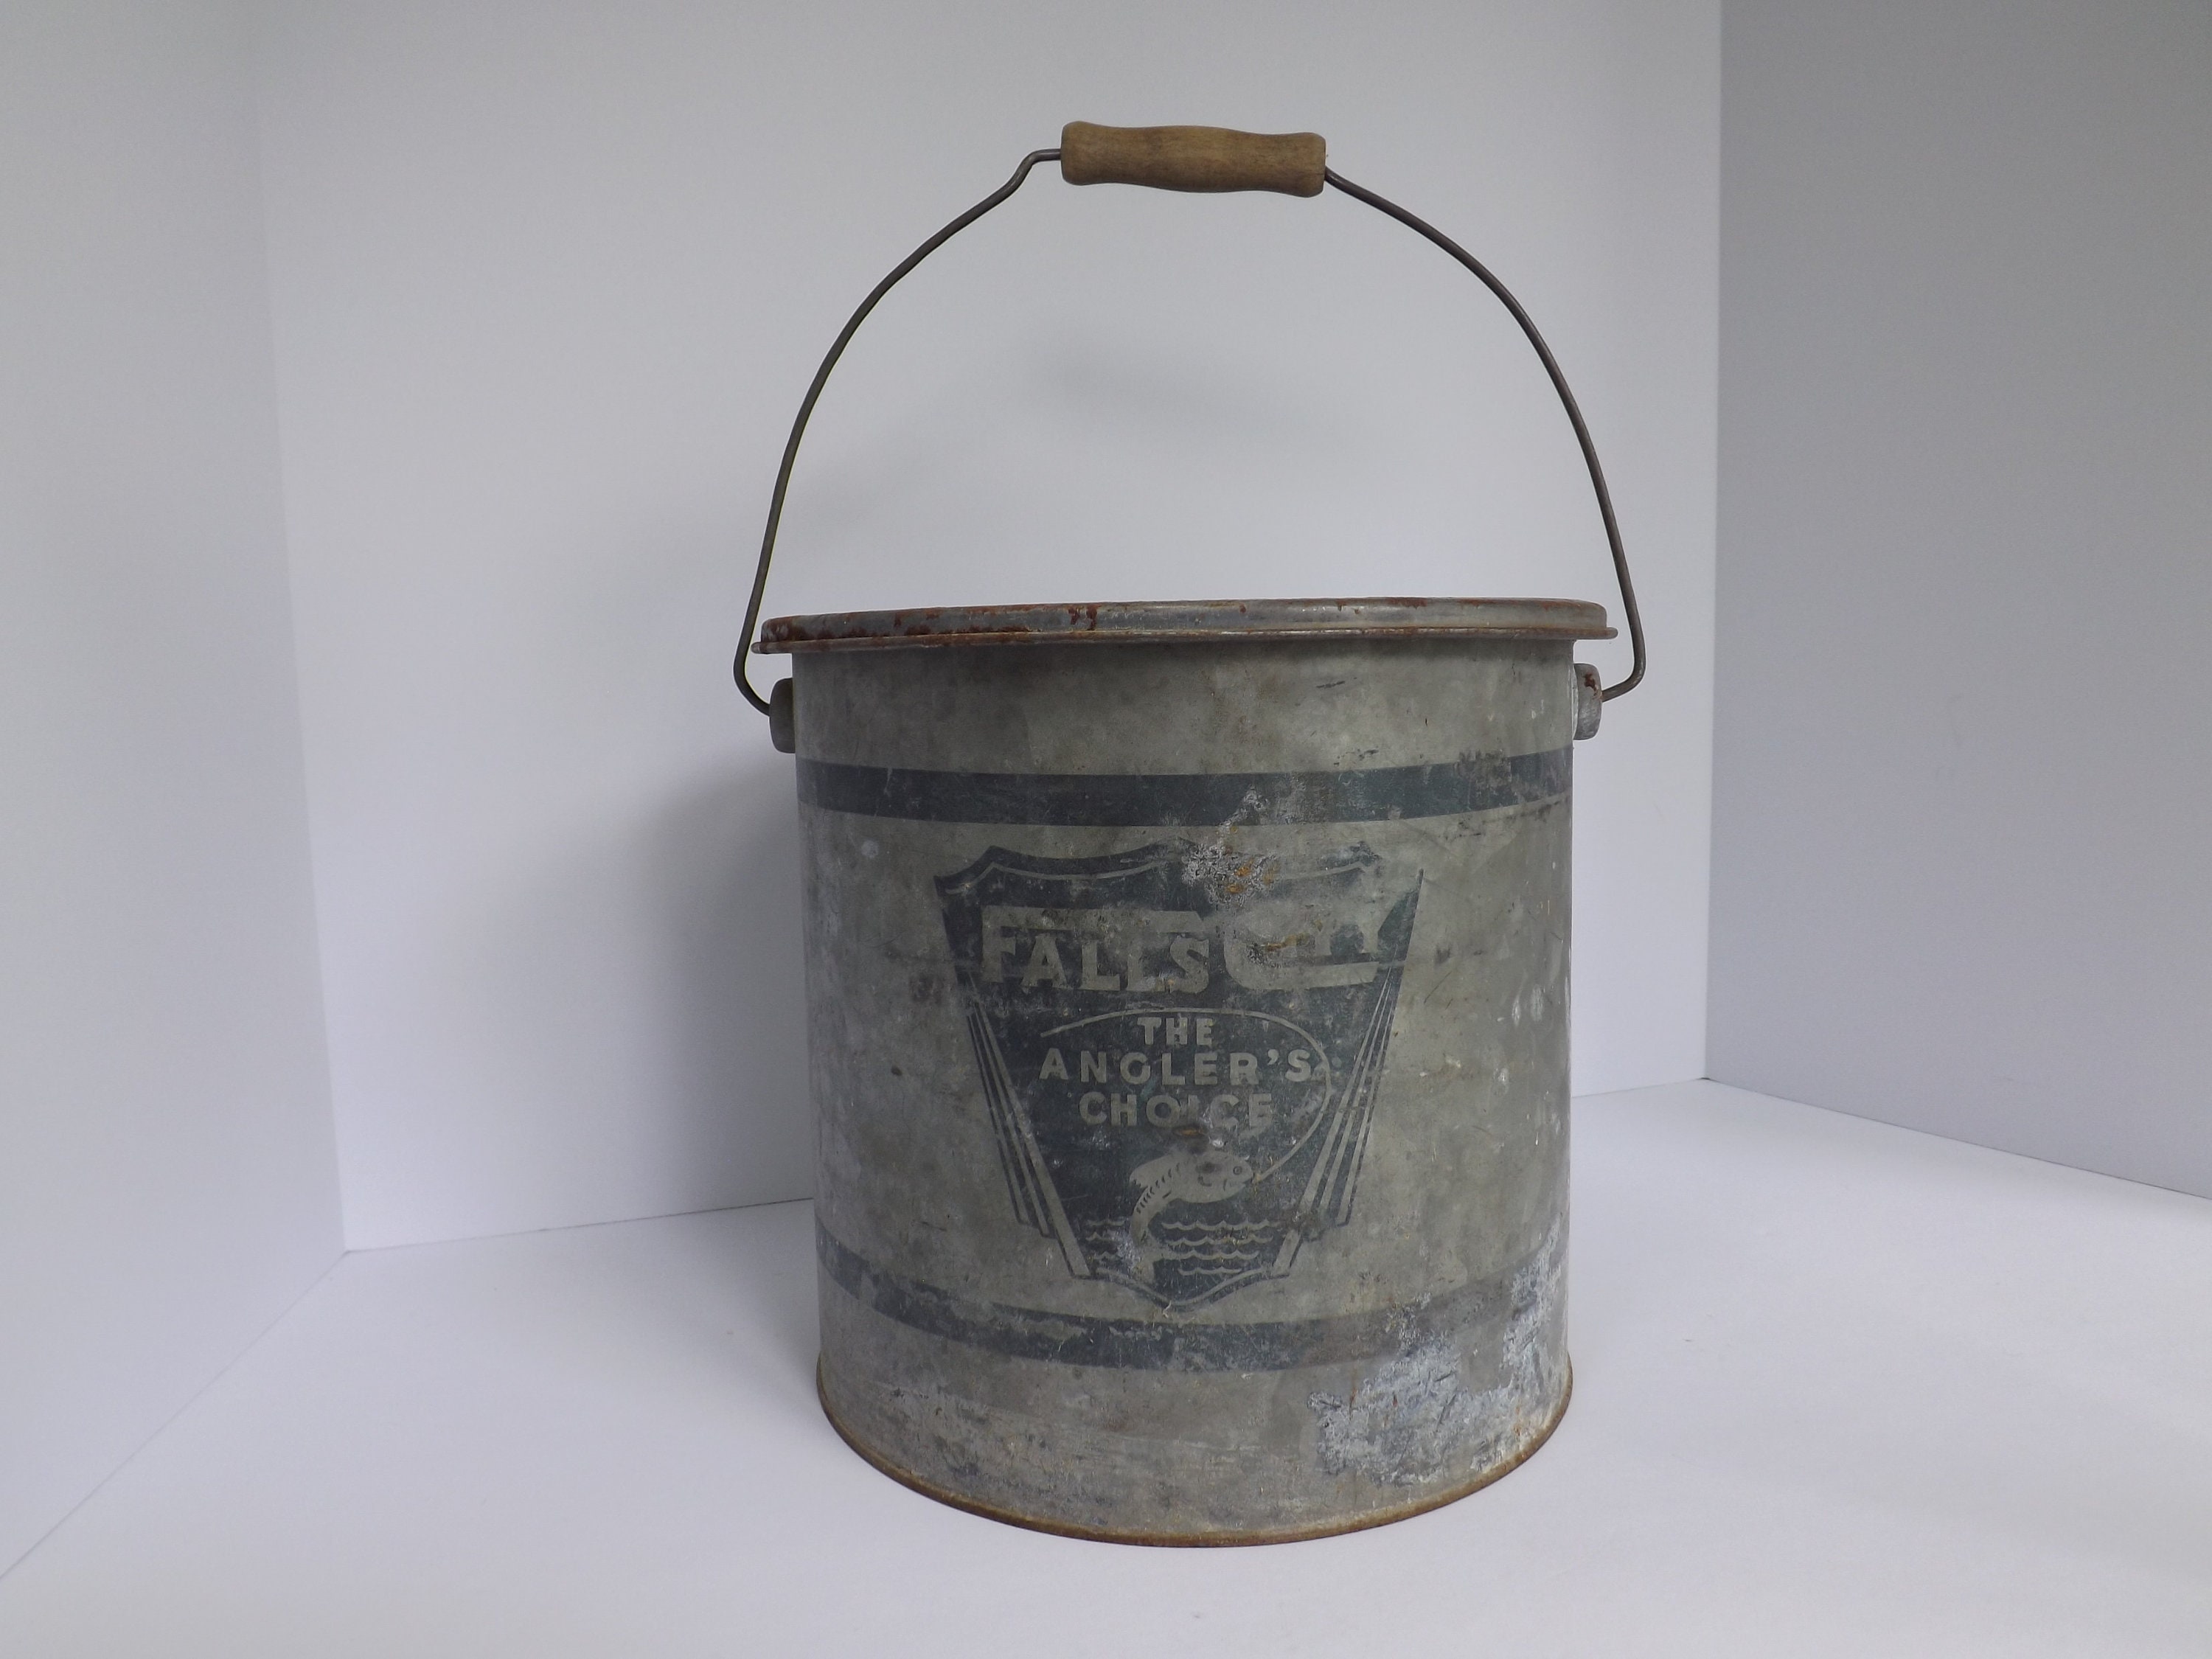 Small 6 Round Metal Bucket With Handle, Vintage Rustic Farmhouse Container  Storage 